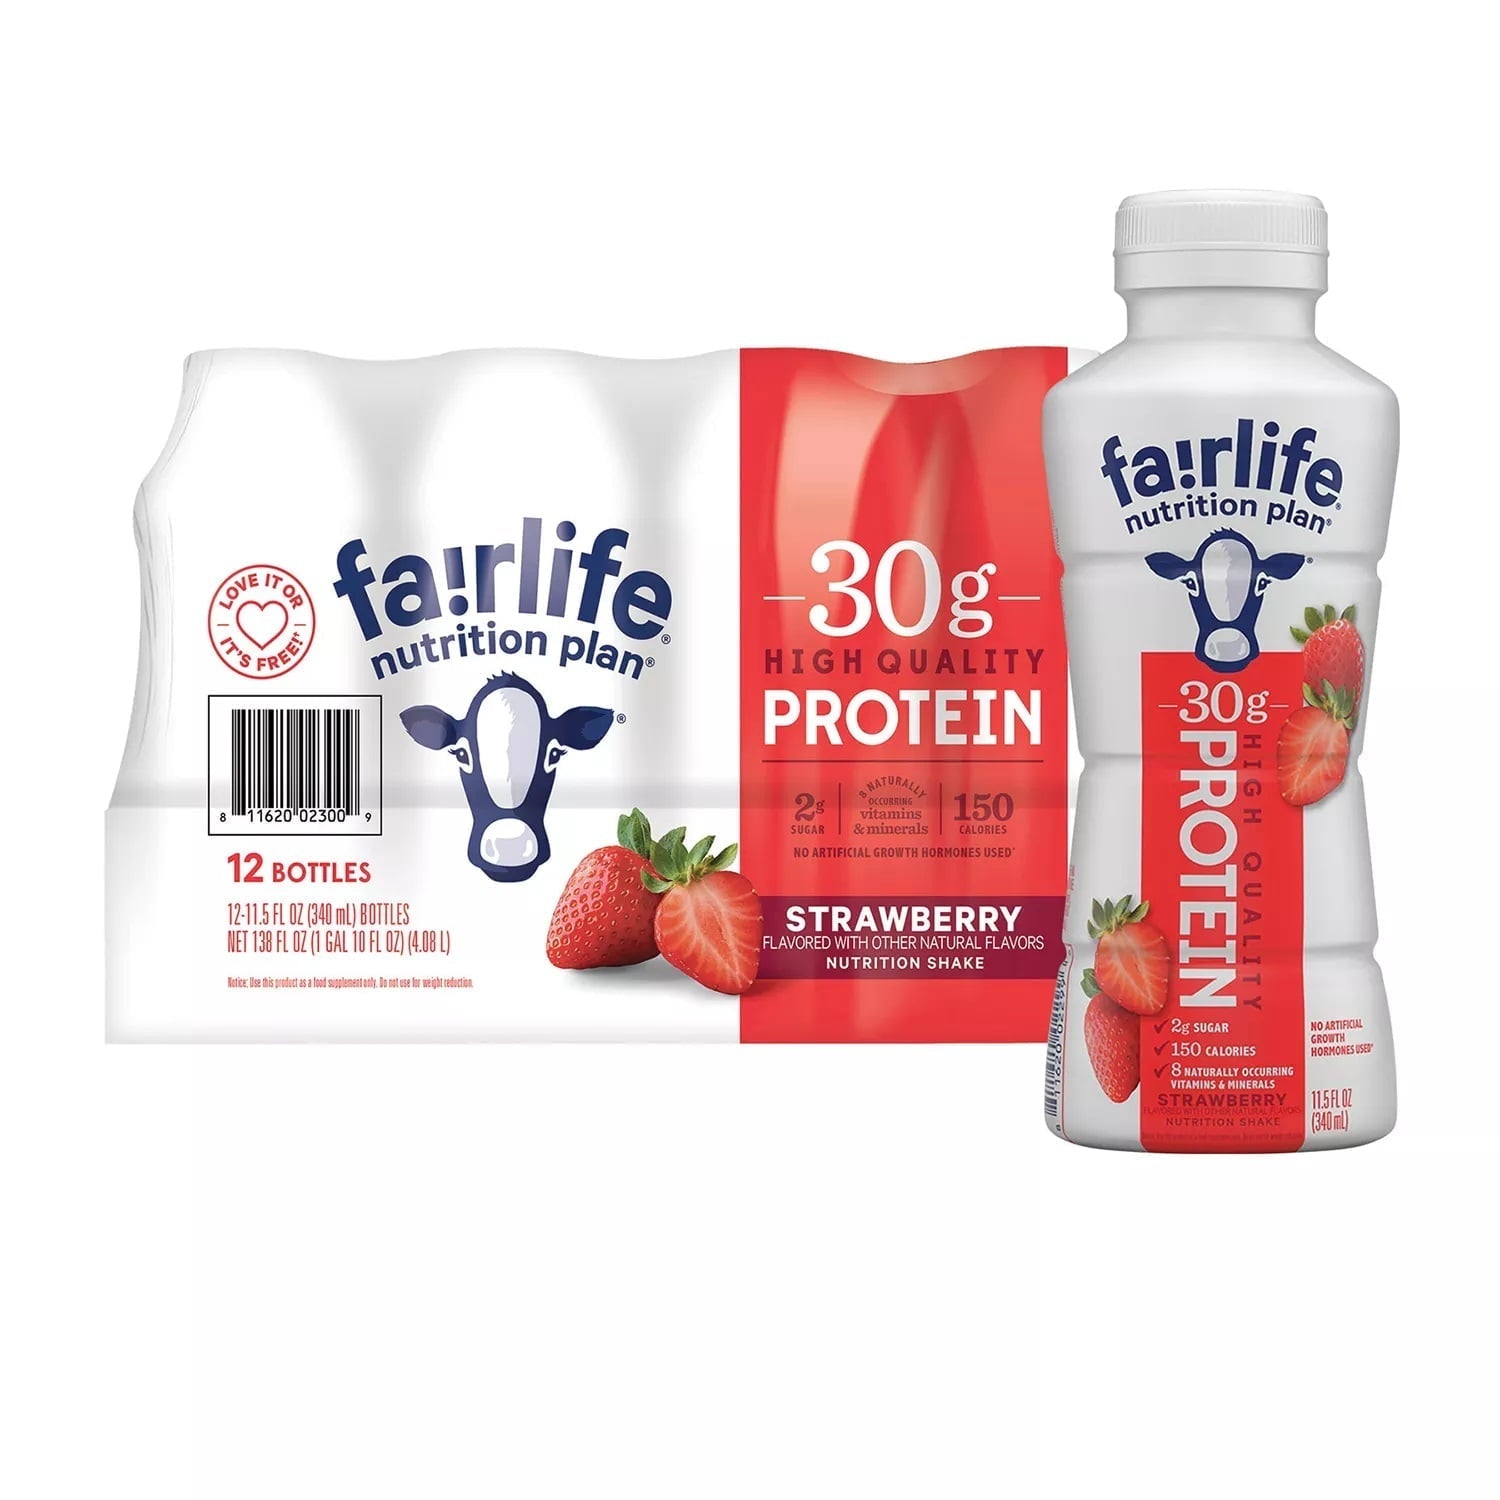 Wholesale prices with free shipping all over United States Fairlife Nutrition Plan Strawberry, 30g Protein Shake (11.5 fl. oz., 12 pk.) - Steven Deals